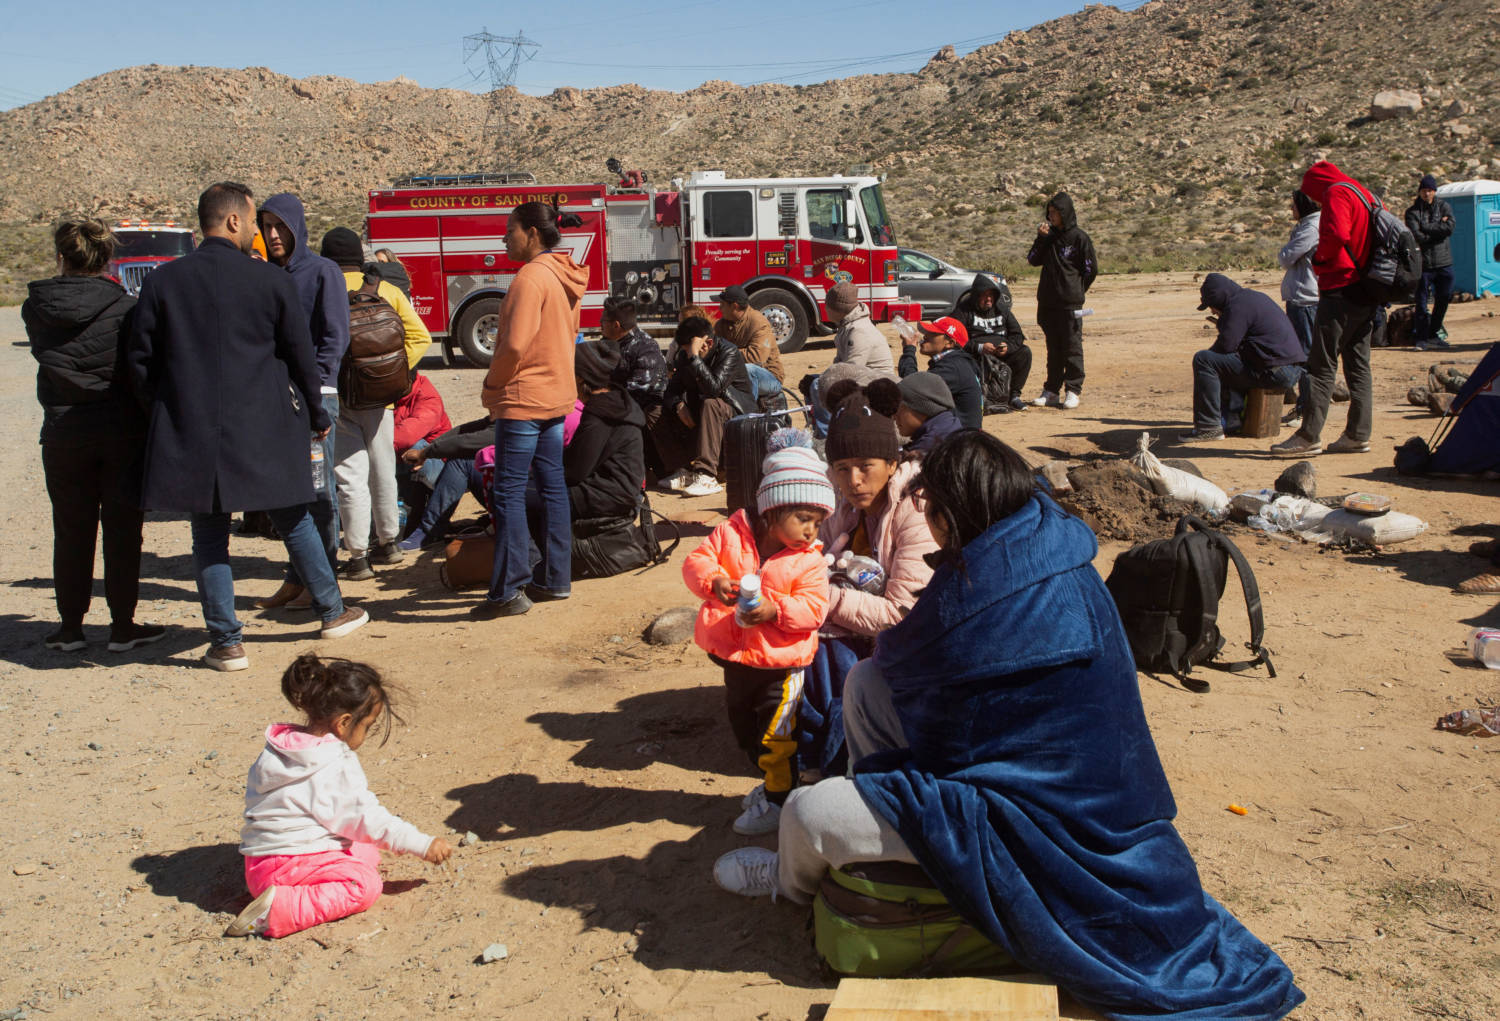 Migrants Await The Possibility Of Being Processed By The Border Patrol, In Jacumba